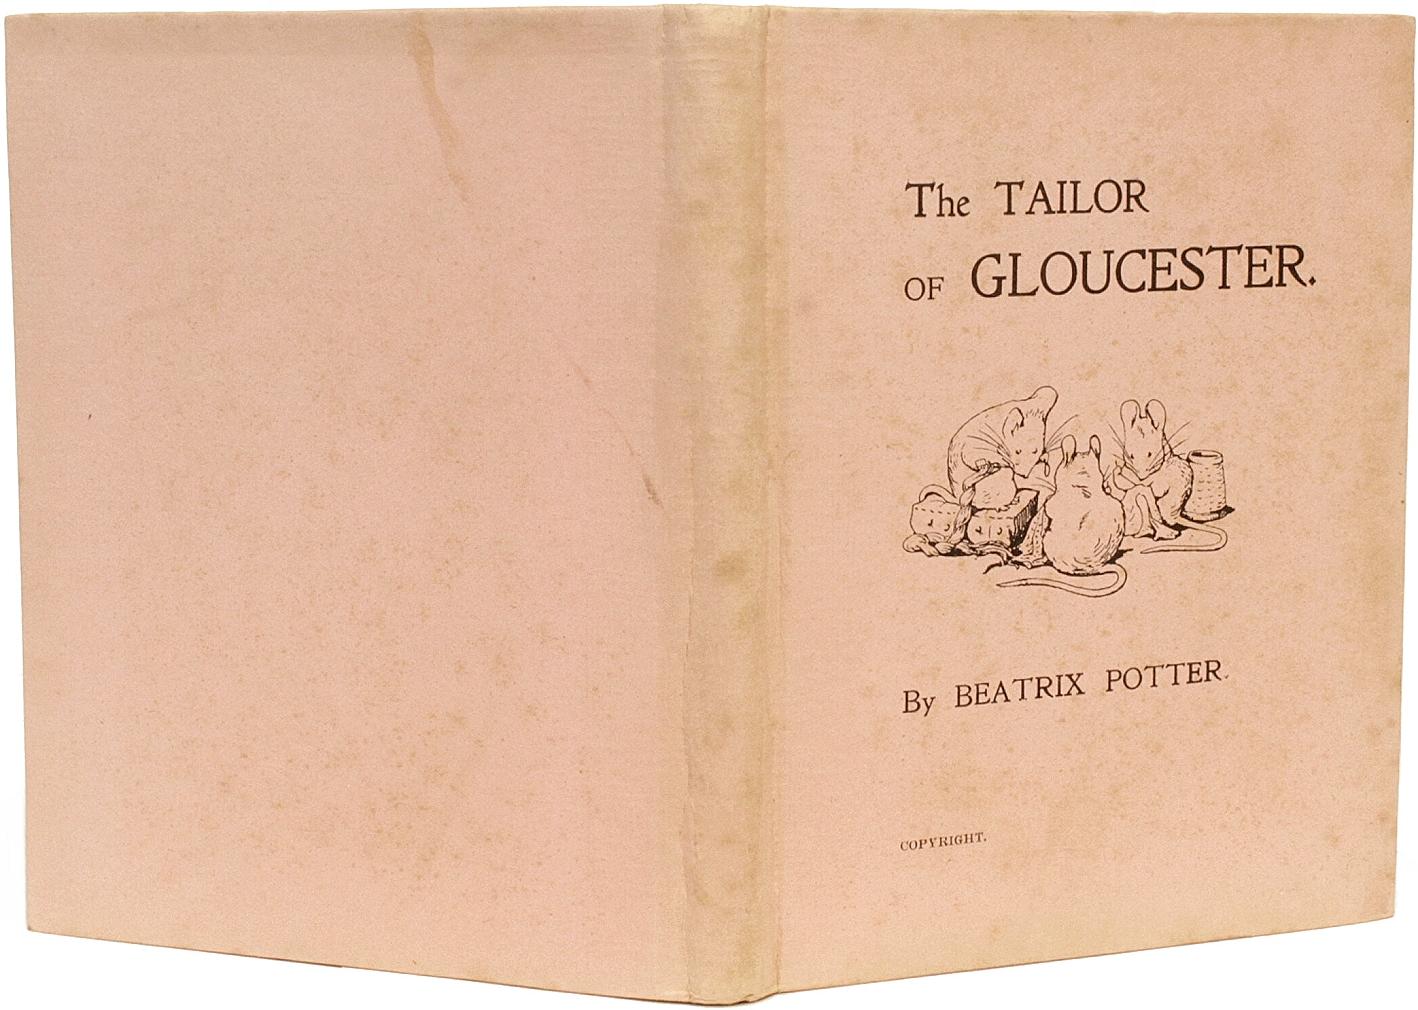 Author: POTTER, Beatrix. 

Title: The Tailor of Gloucester. 

Publisher: London: Privately Printed by Strangeways & Sons, 1902.

PRIVATELY PRINTED BY THE AUTHOR, LIMITED TO 500 COPIES. 1 vol., unpaginated, illustrated with a frontis & 15 color